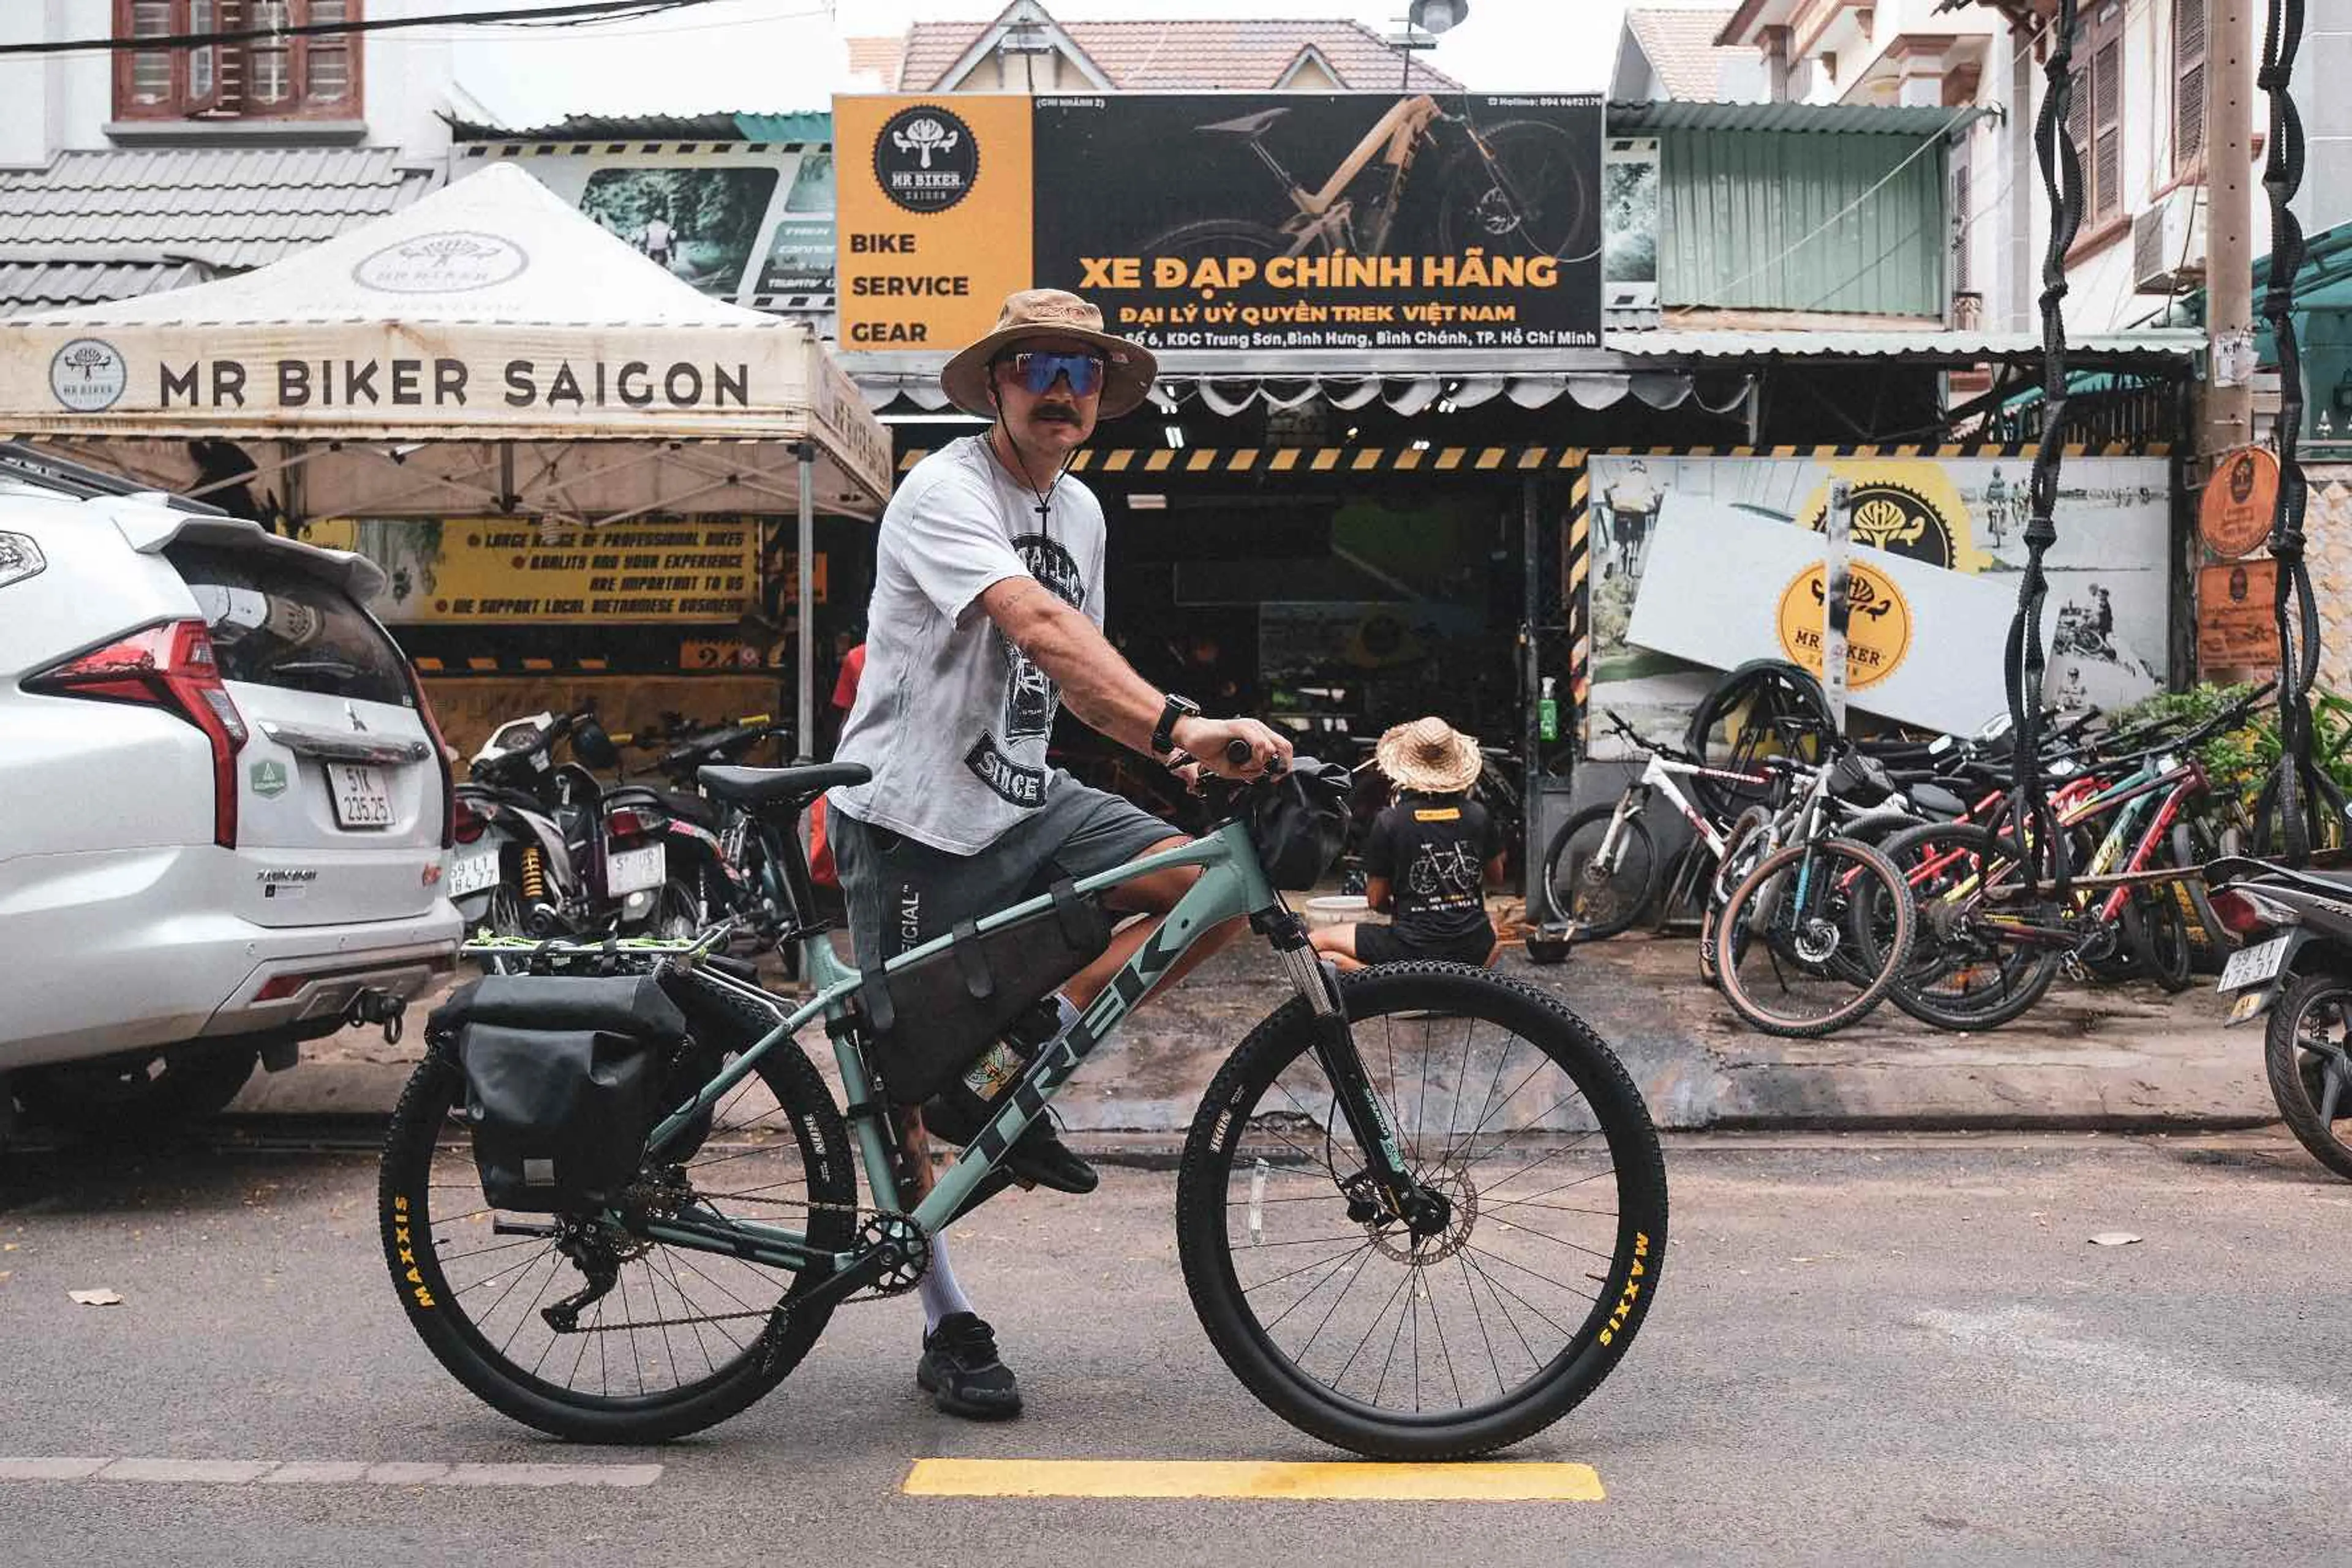 Mr Biker Saigon Is The Most Trusted Bike Shop And Travel Agency in Vietnam